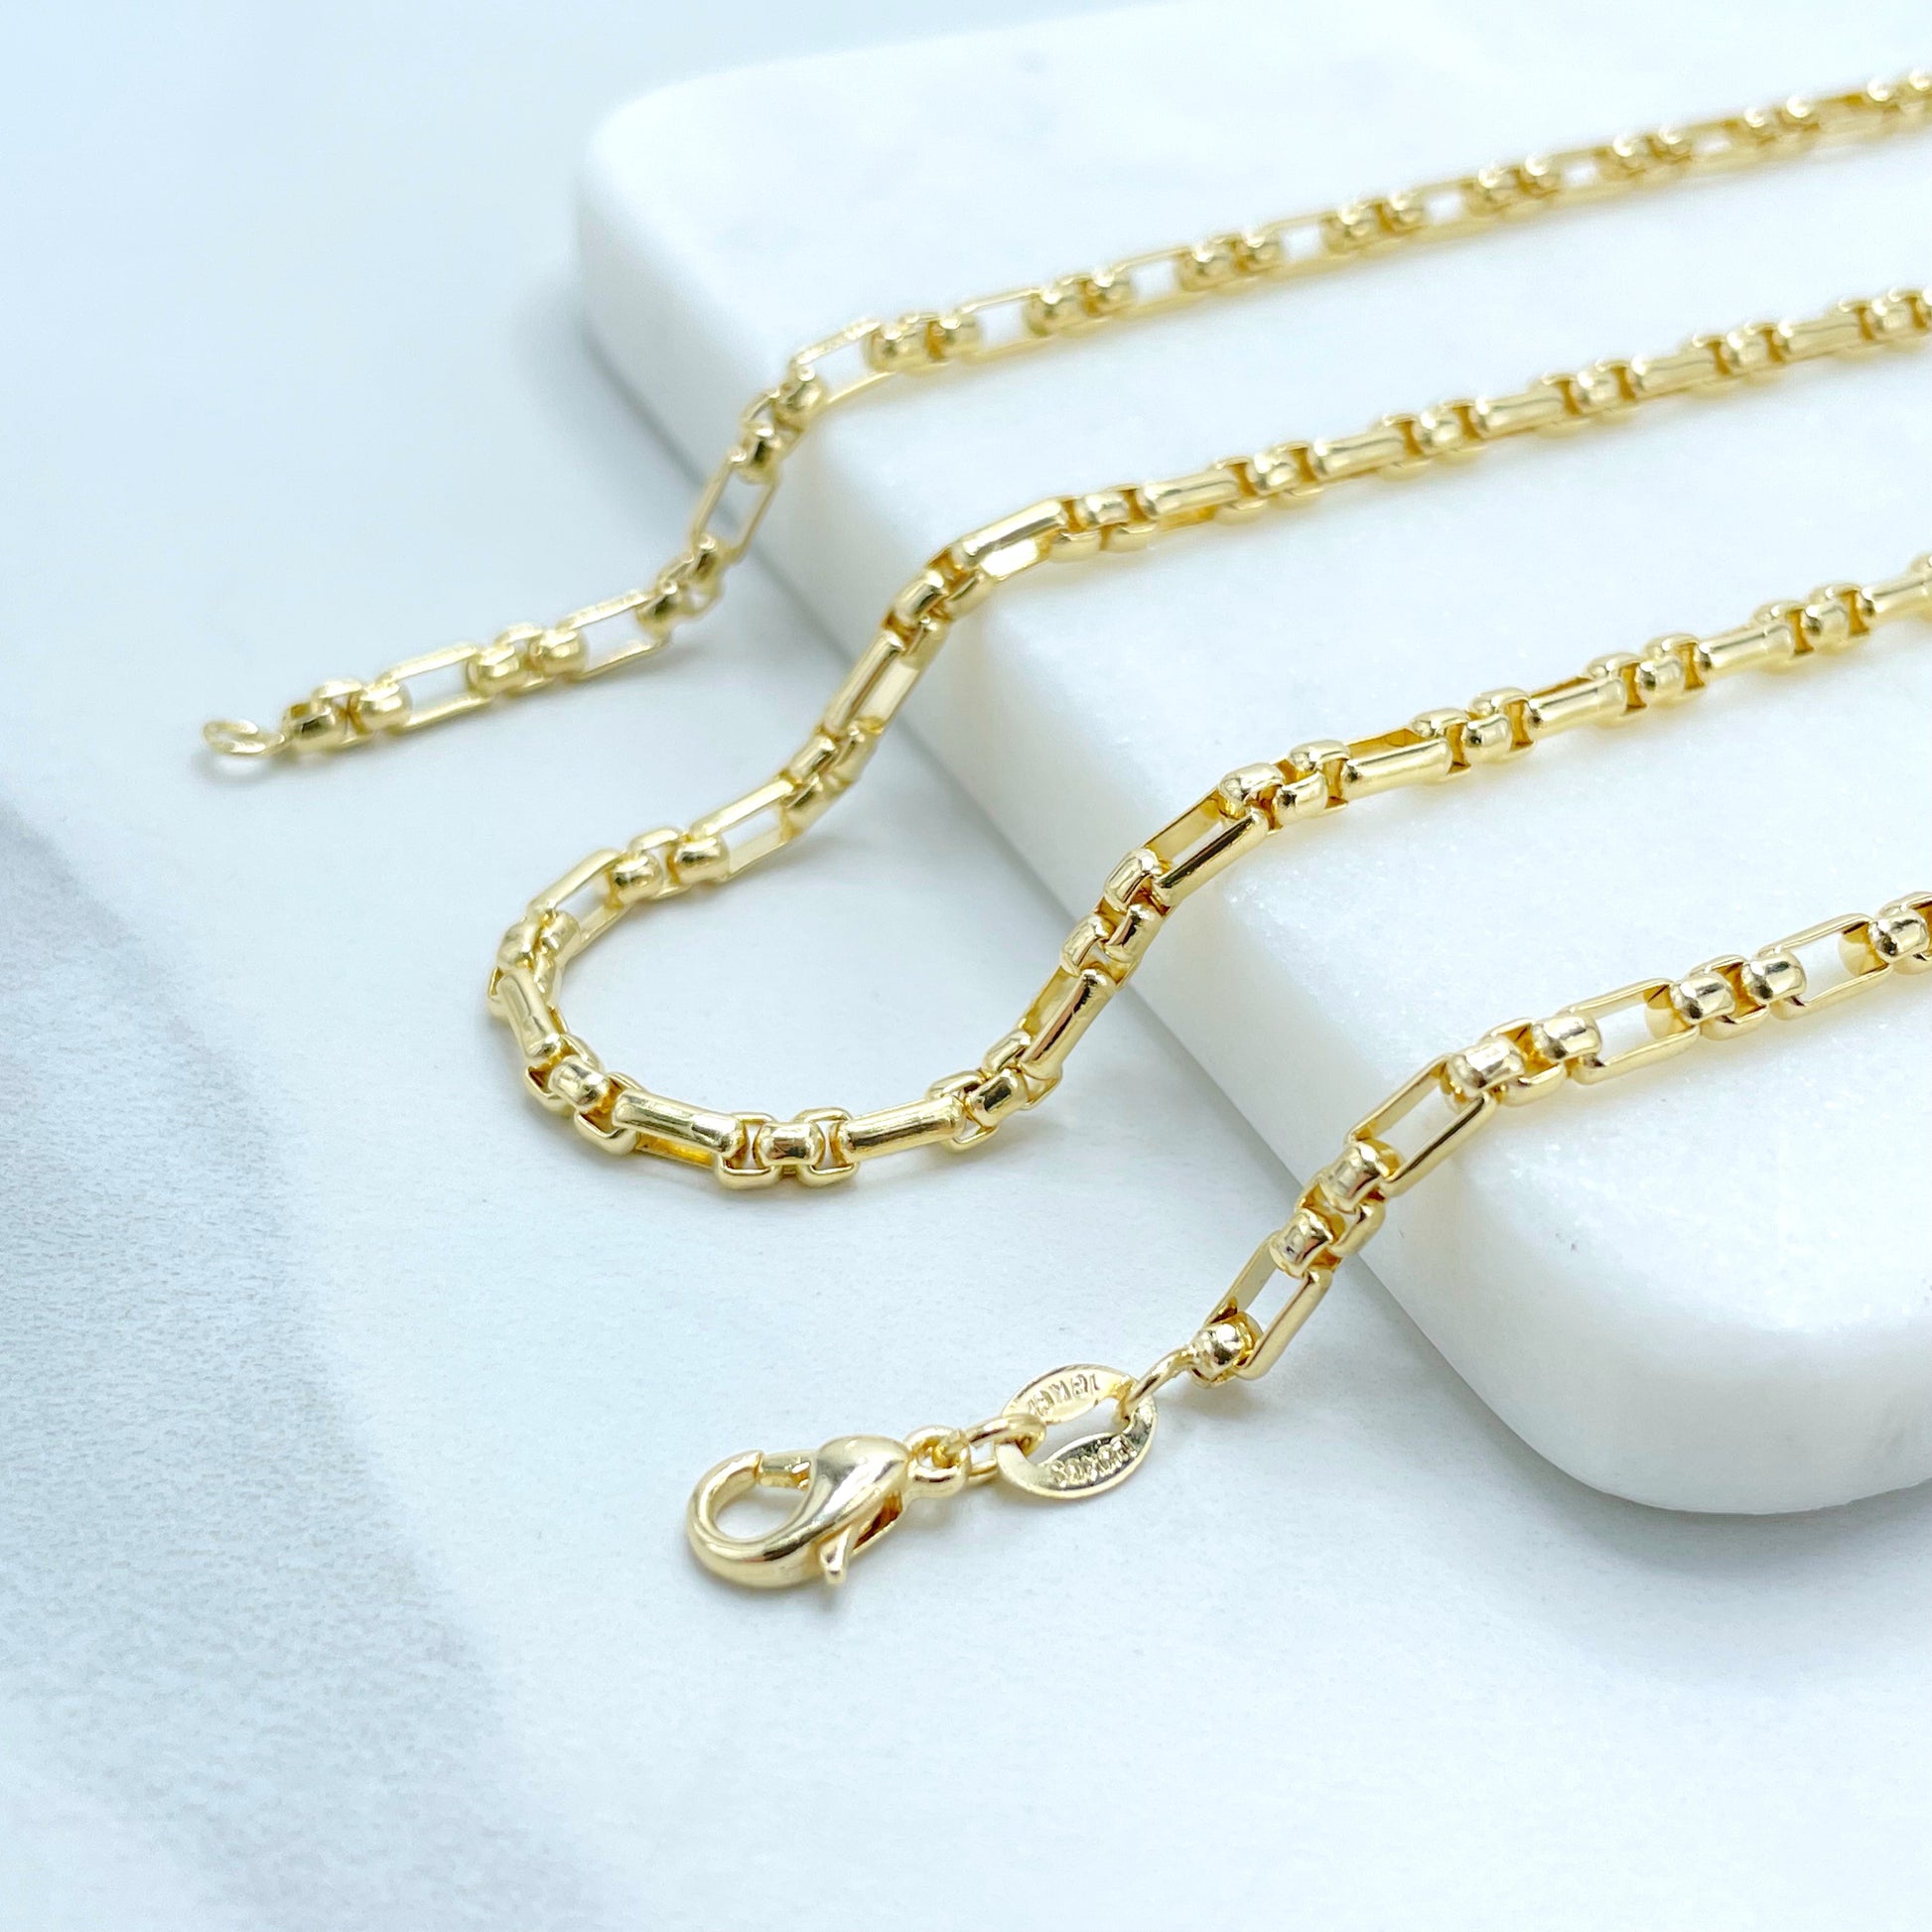 18k Gold Filled 3mm Box Chain Figaro Link, 18 inches, 24 inches or 7 inches of length Bracelet, Chains Wholesale and Jewelry Supplies